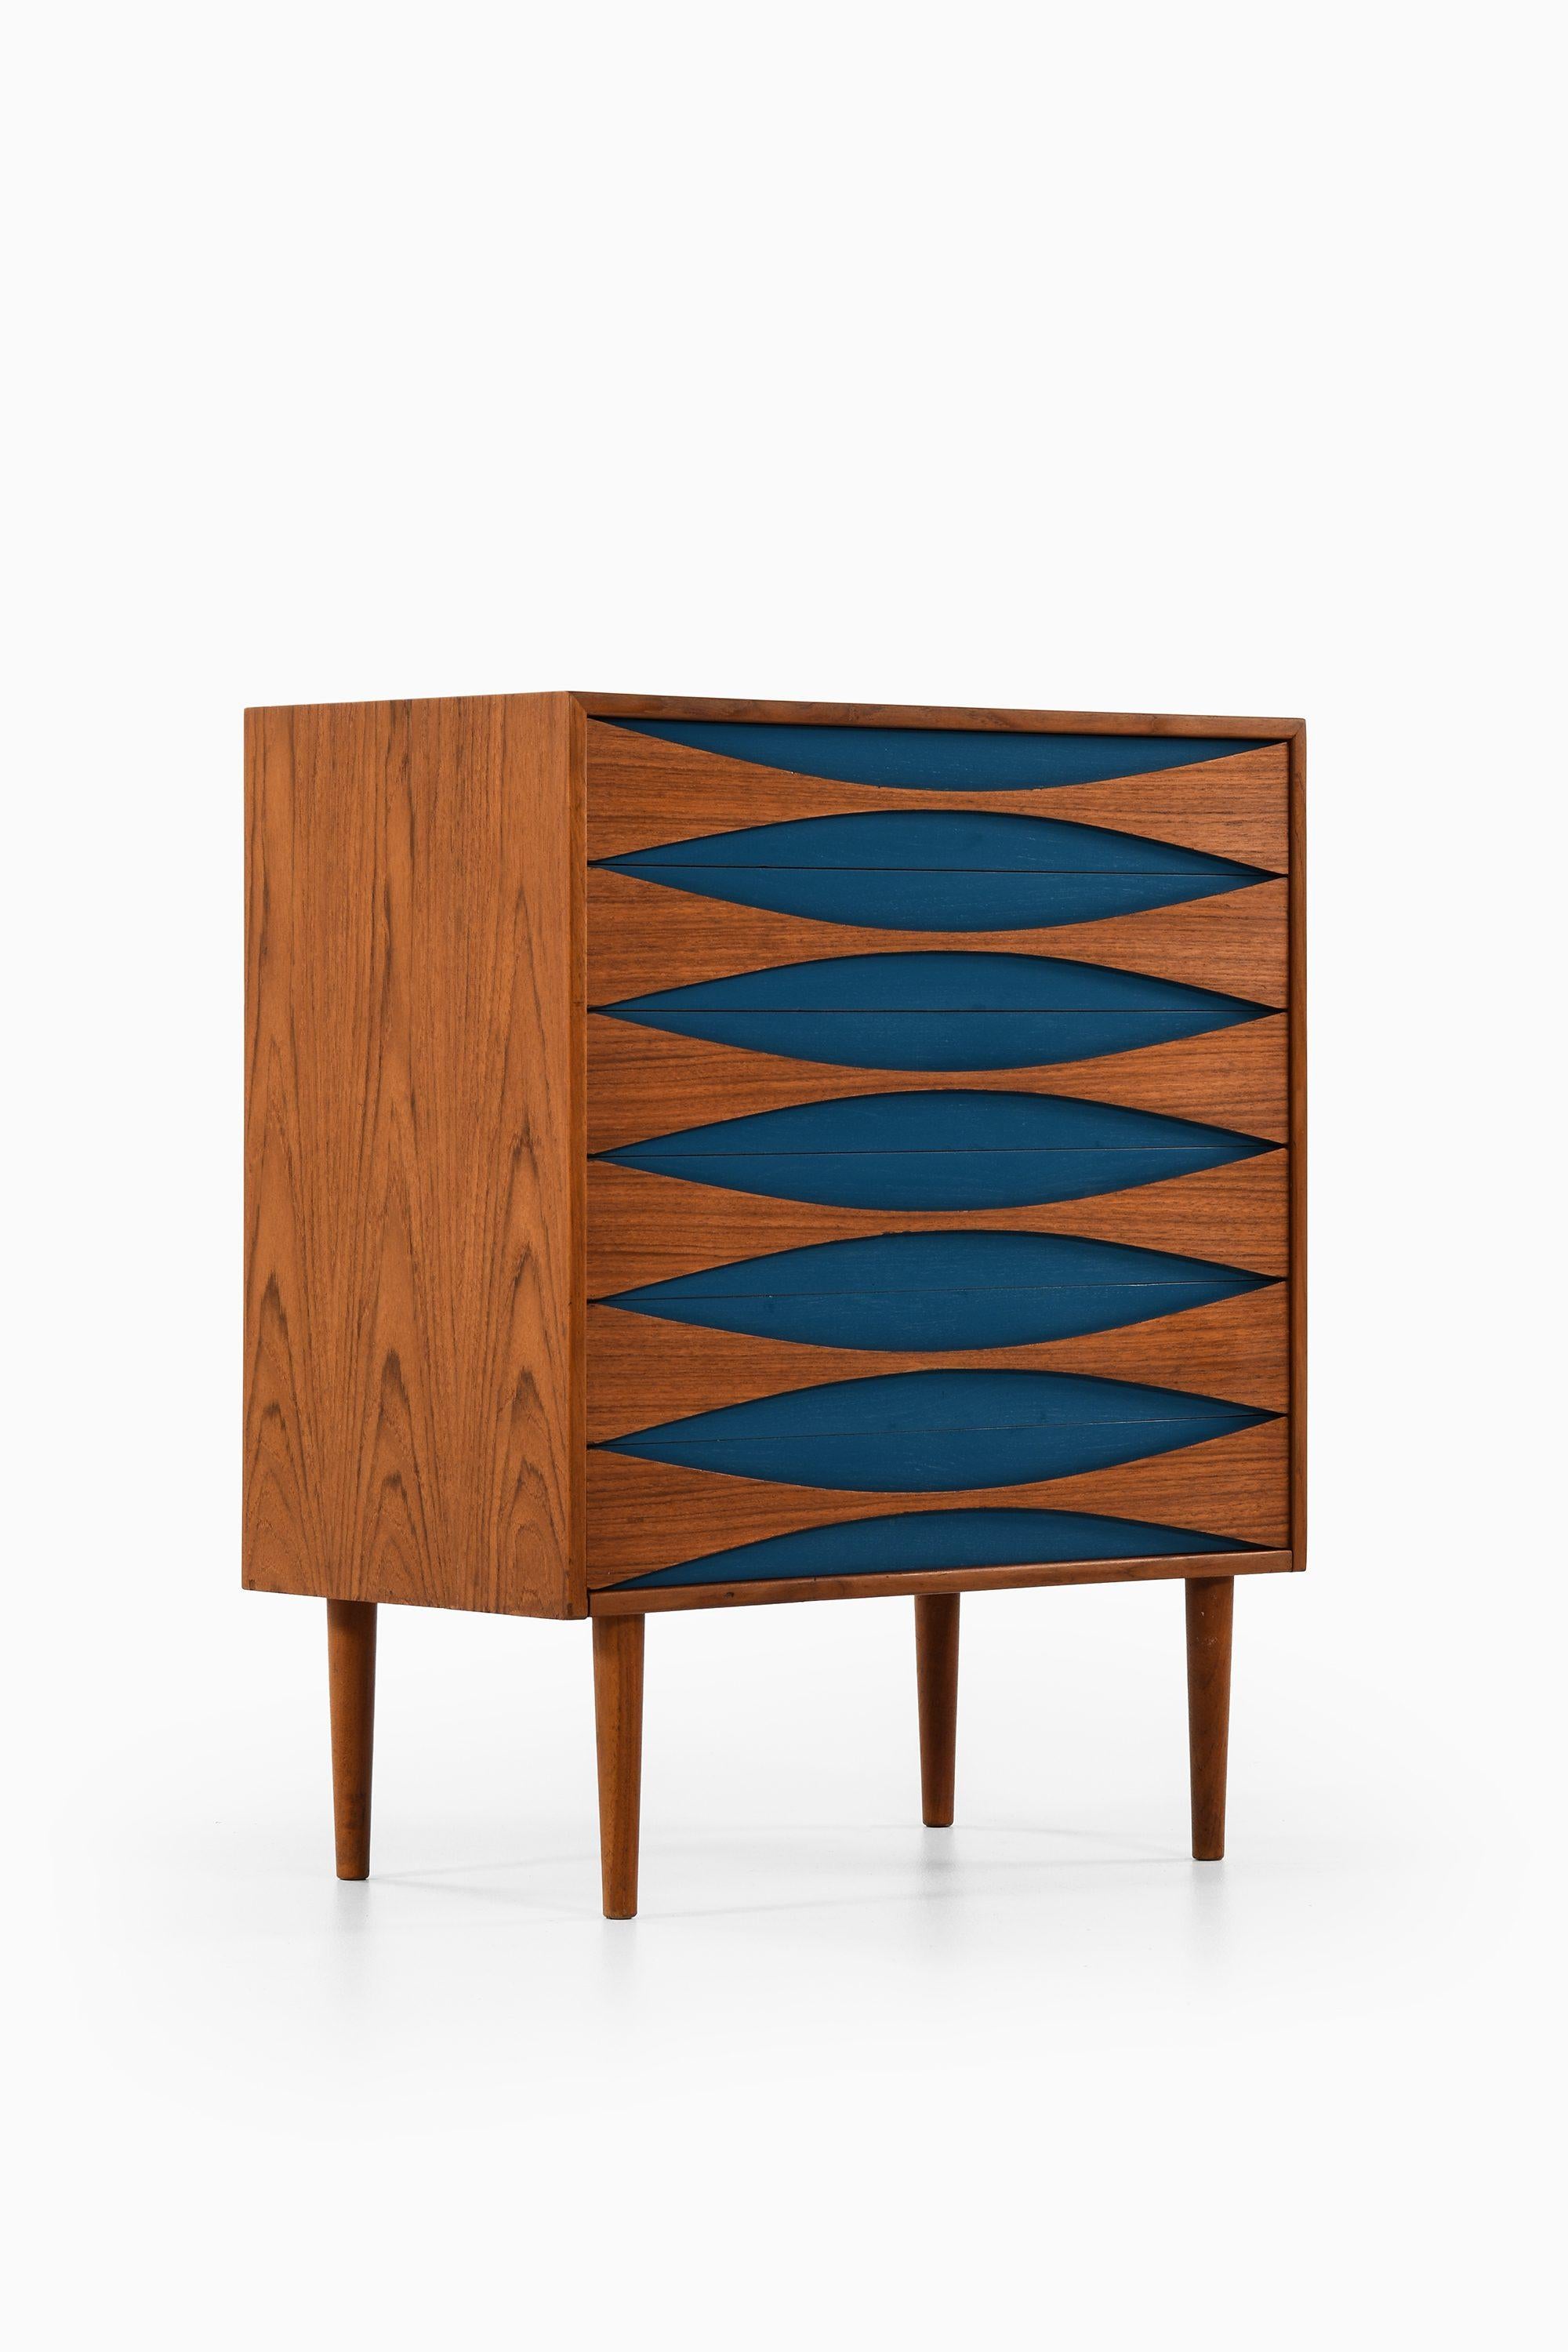 Bureau in Teak and Blue Lacquered by Arne Vodder, 1950's

Additional Information:
Material: Teak and blue lacquered
Style: Mid century, Scandinavia
Produced by N.C Møbler in Denmark
Dimensions (W x D x H): 84 x 45 x 100.5 cm
Condition: Good vintage